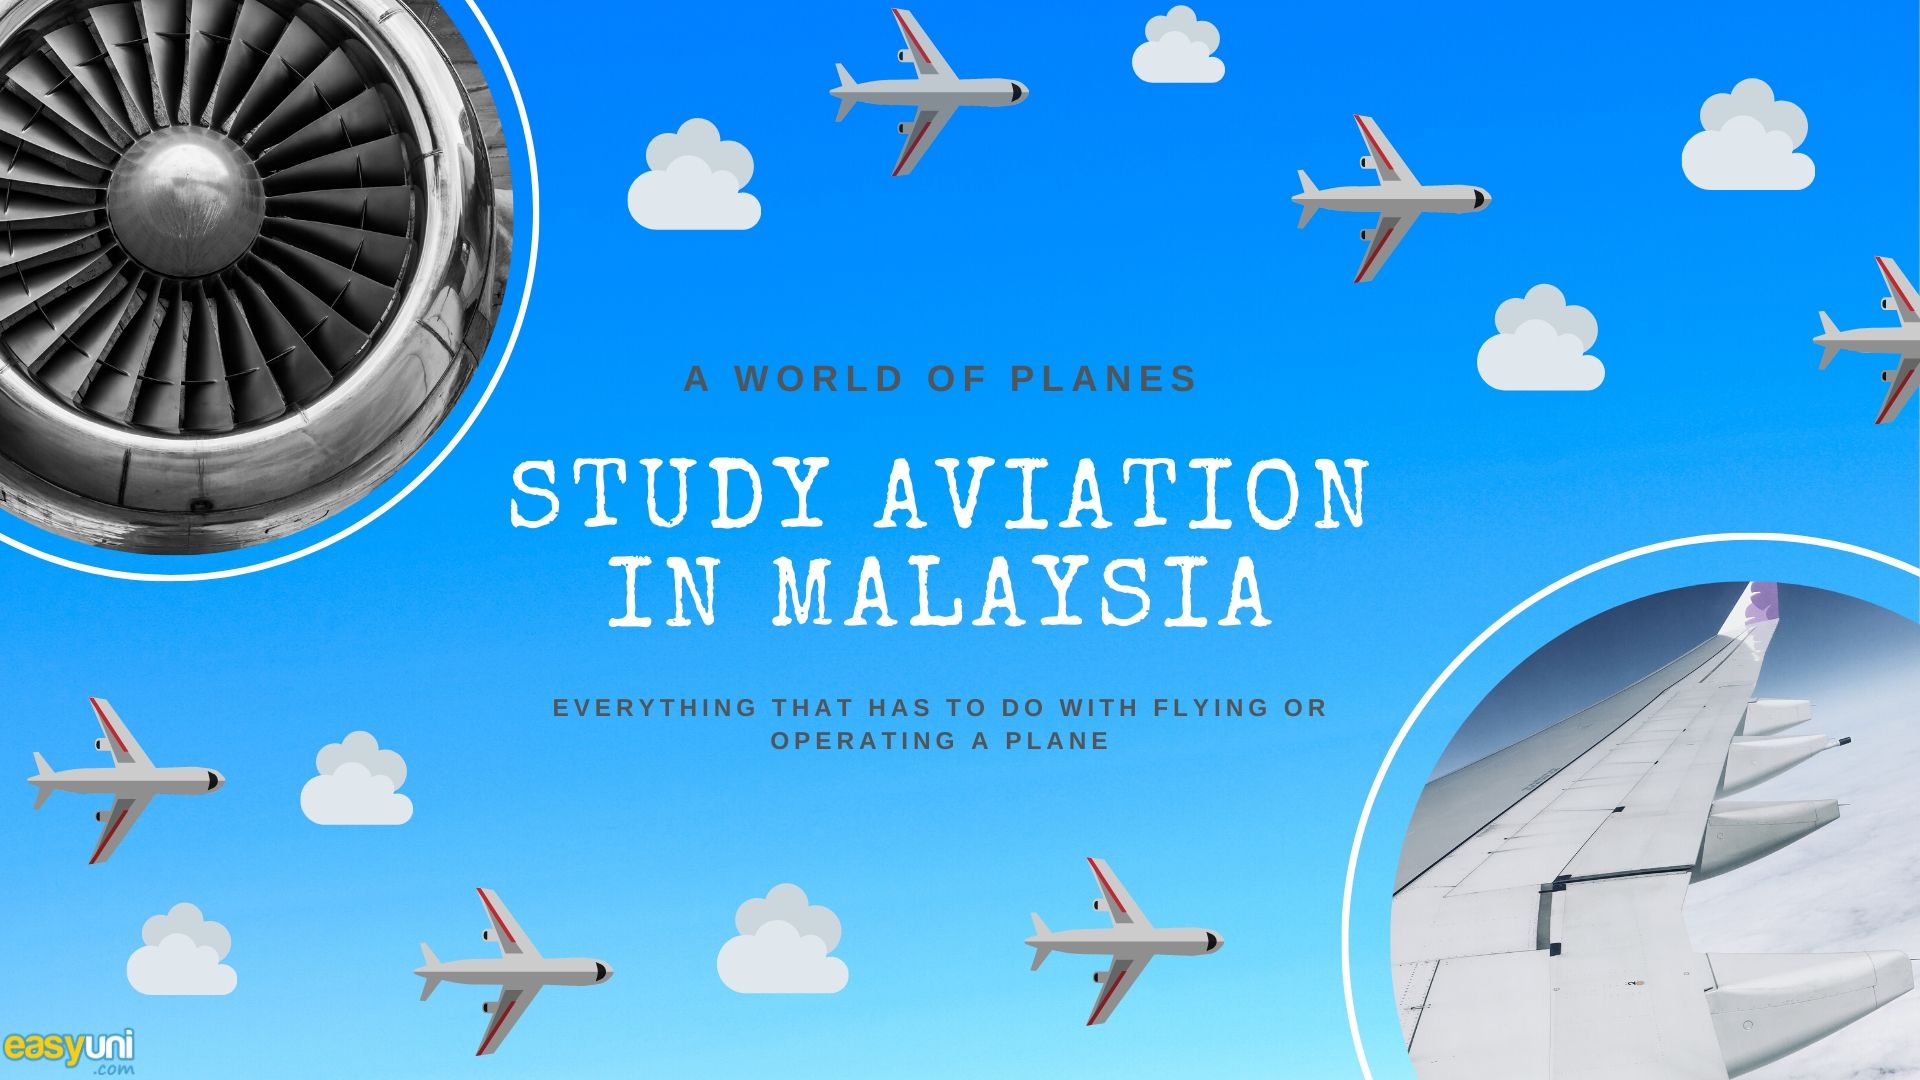 Study aviation in Malaysia - everything you need to know